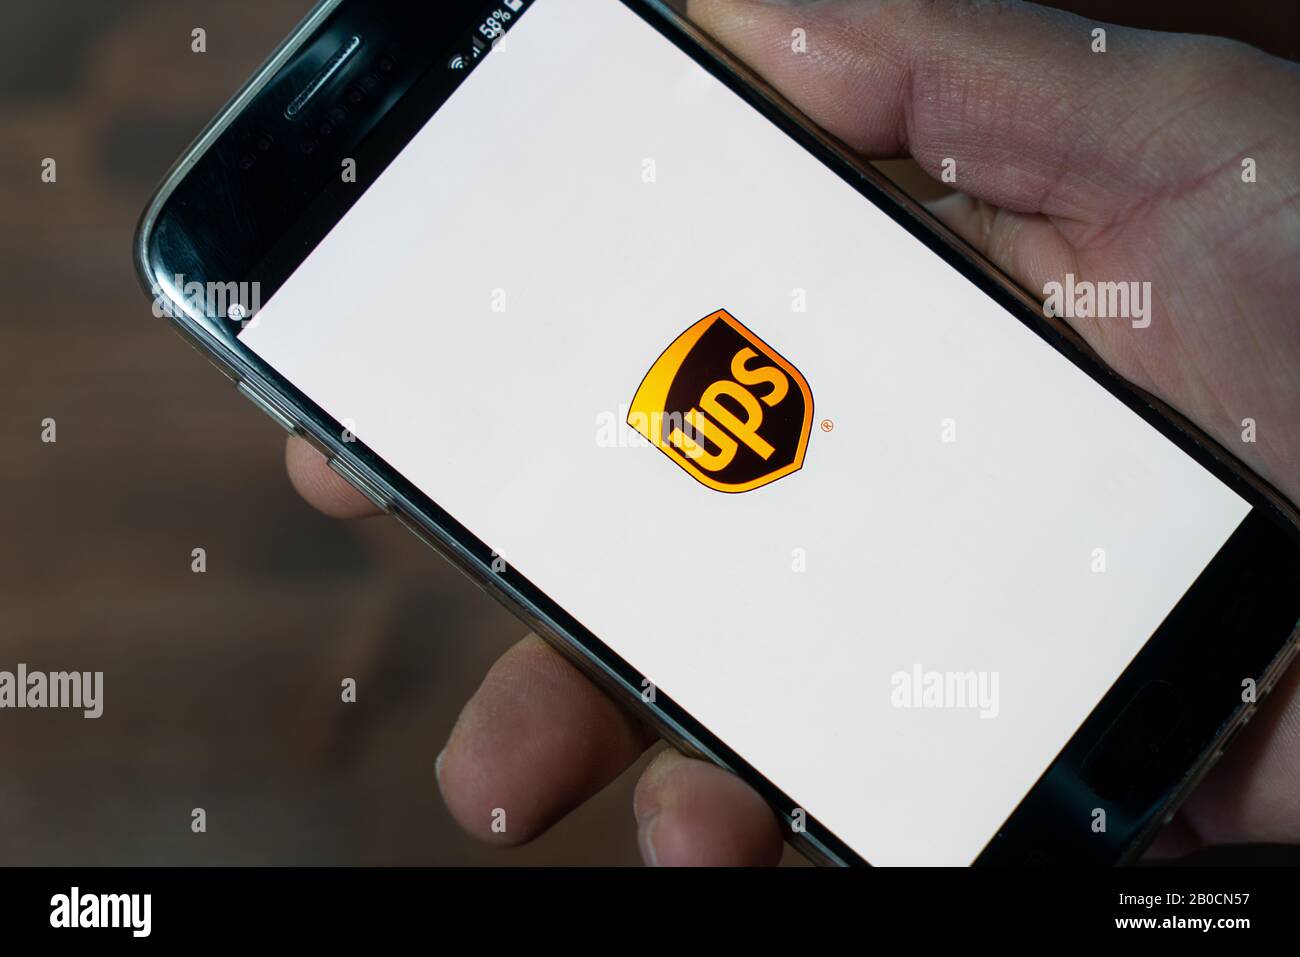 the UPS app on a mobile phone Stock Photo